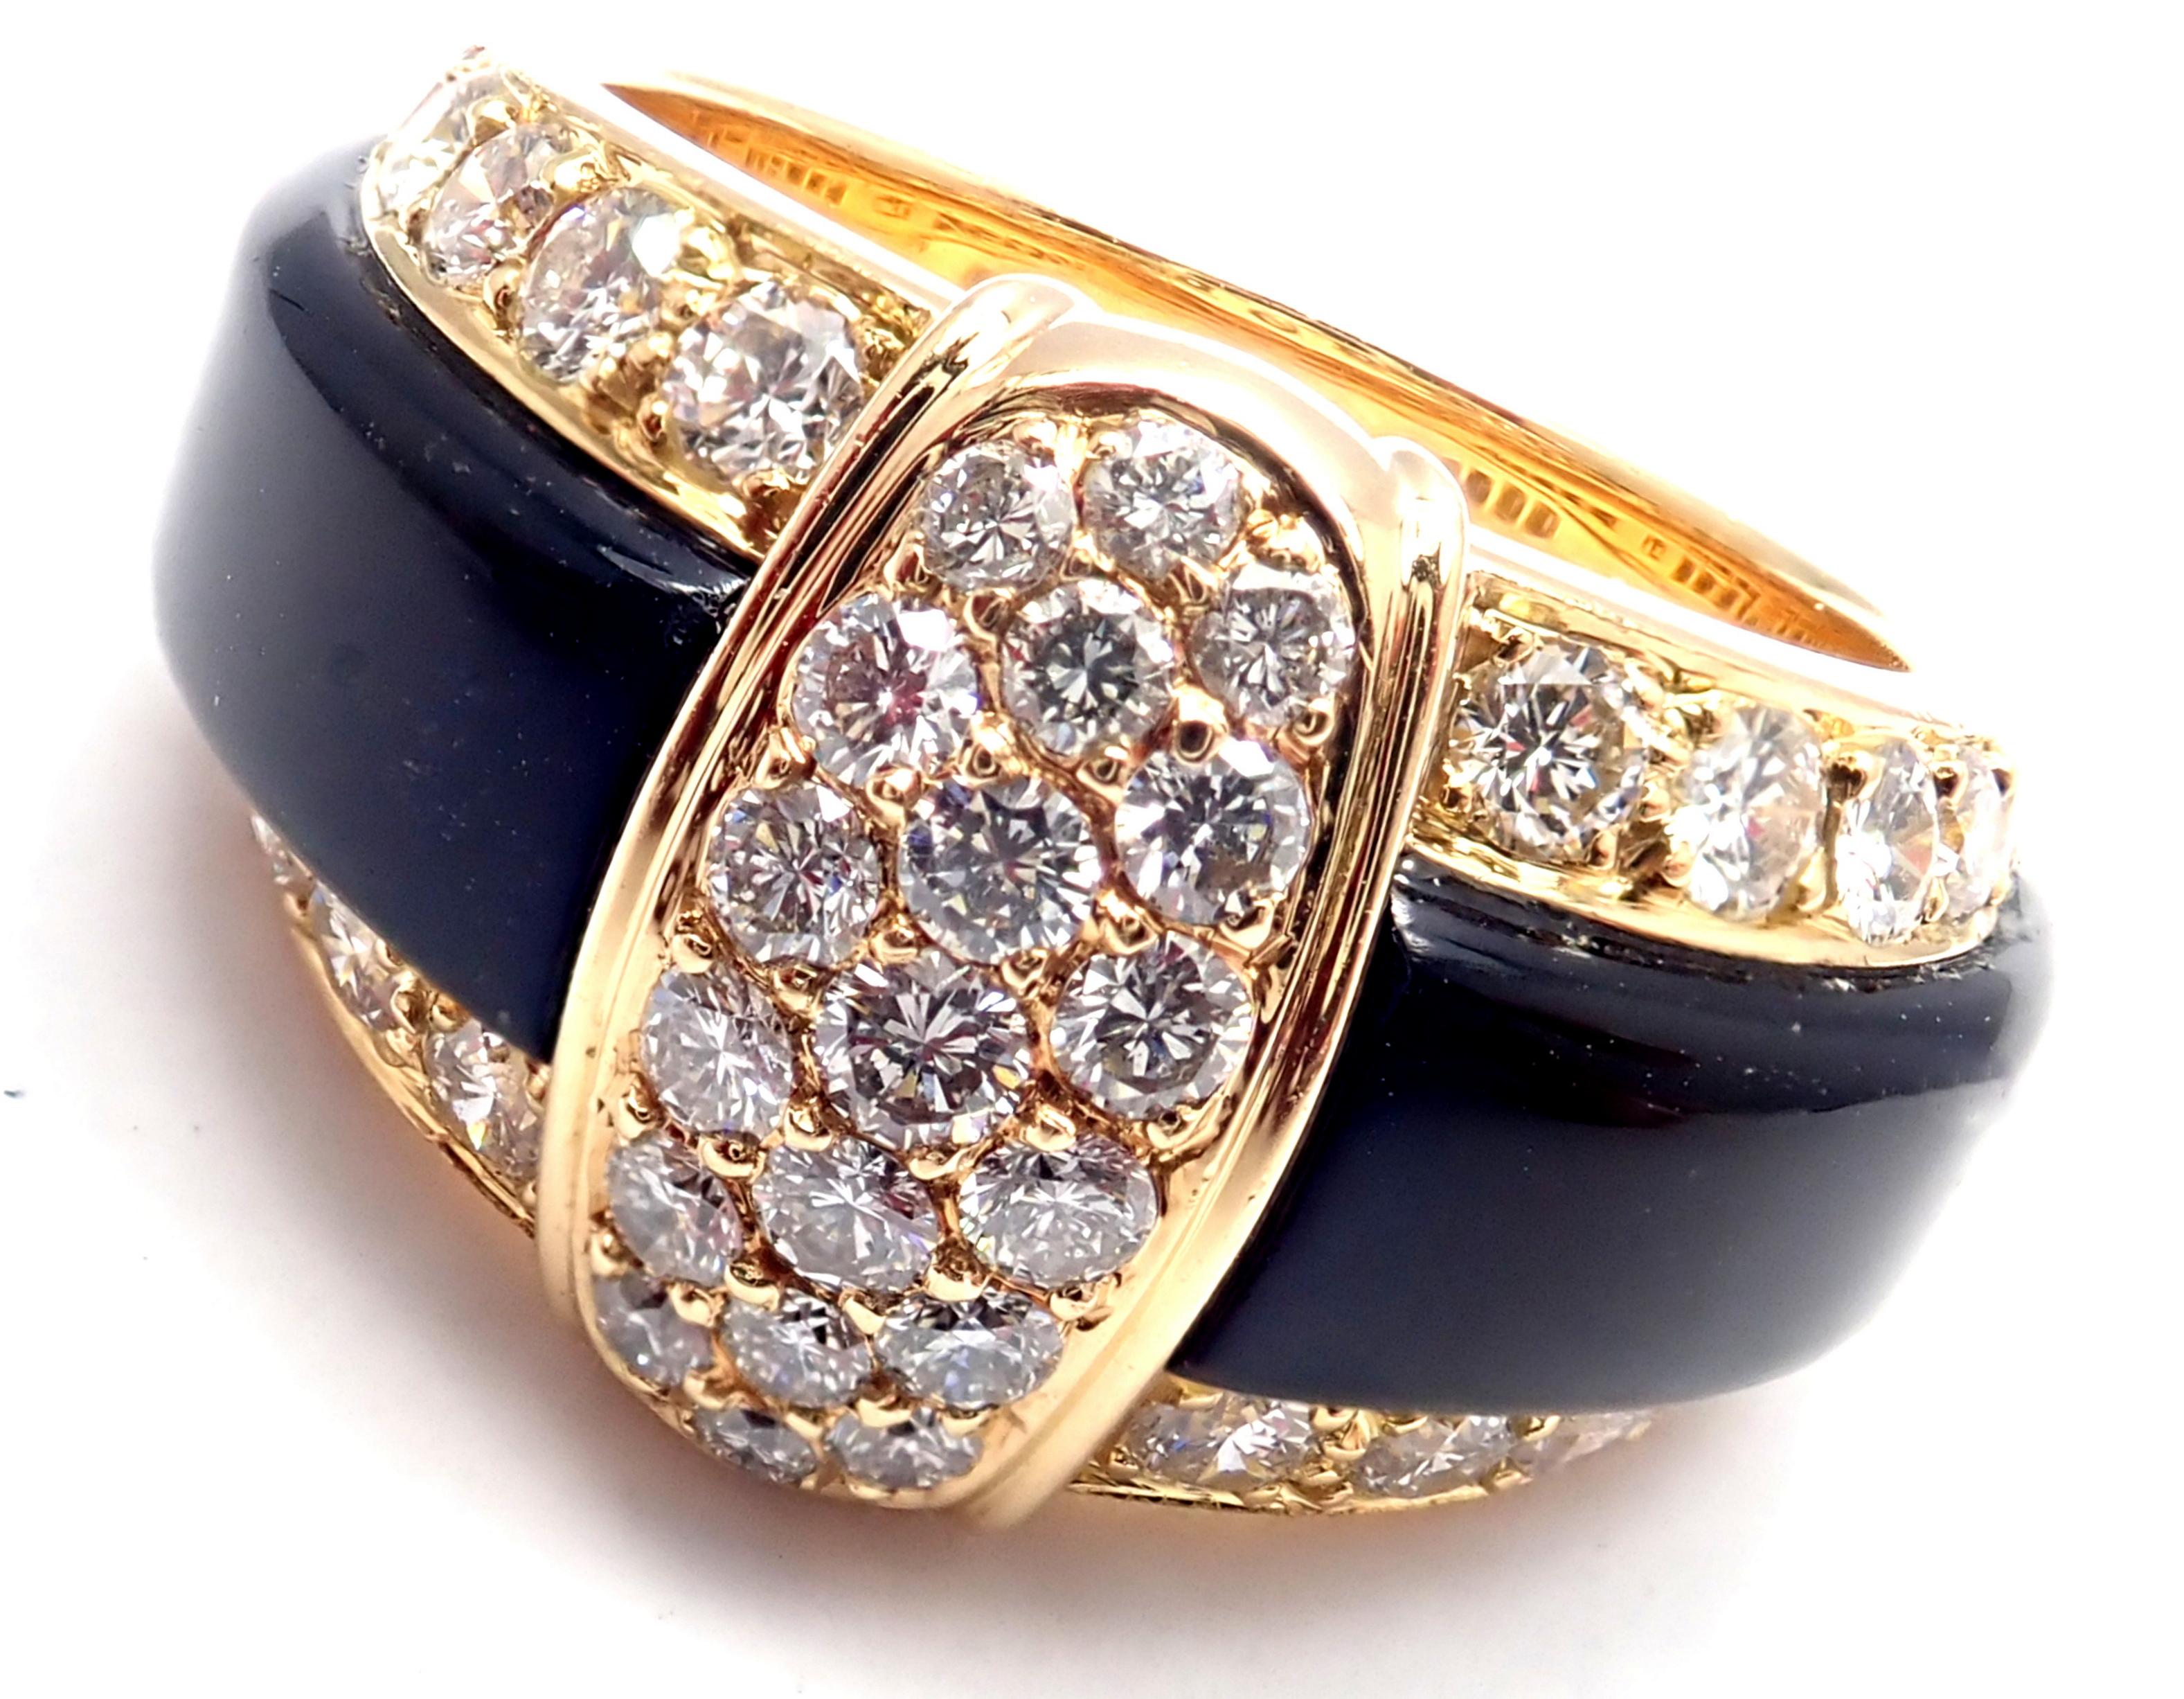 18k Yellow Gold Diamond & Black Onyx Vintage Ring by Van Cleef & Arpels. 
With 43 round brilliant cut diamonds VS1 clarity, G color total weight approx. 1.29ct
Details: 
Ring Size: 6 3/4
Width: 14mm
Weight: 12.3 grams
Stamped Hallmarks: VCA 18k